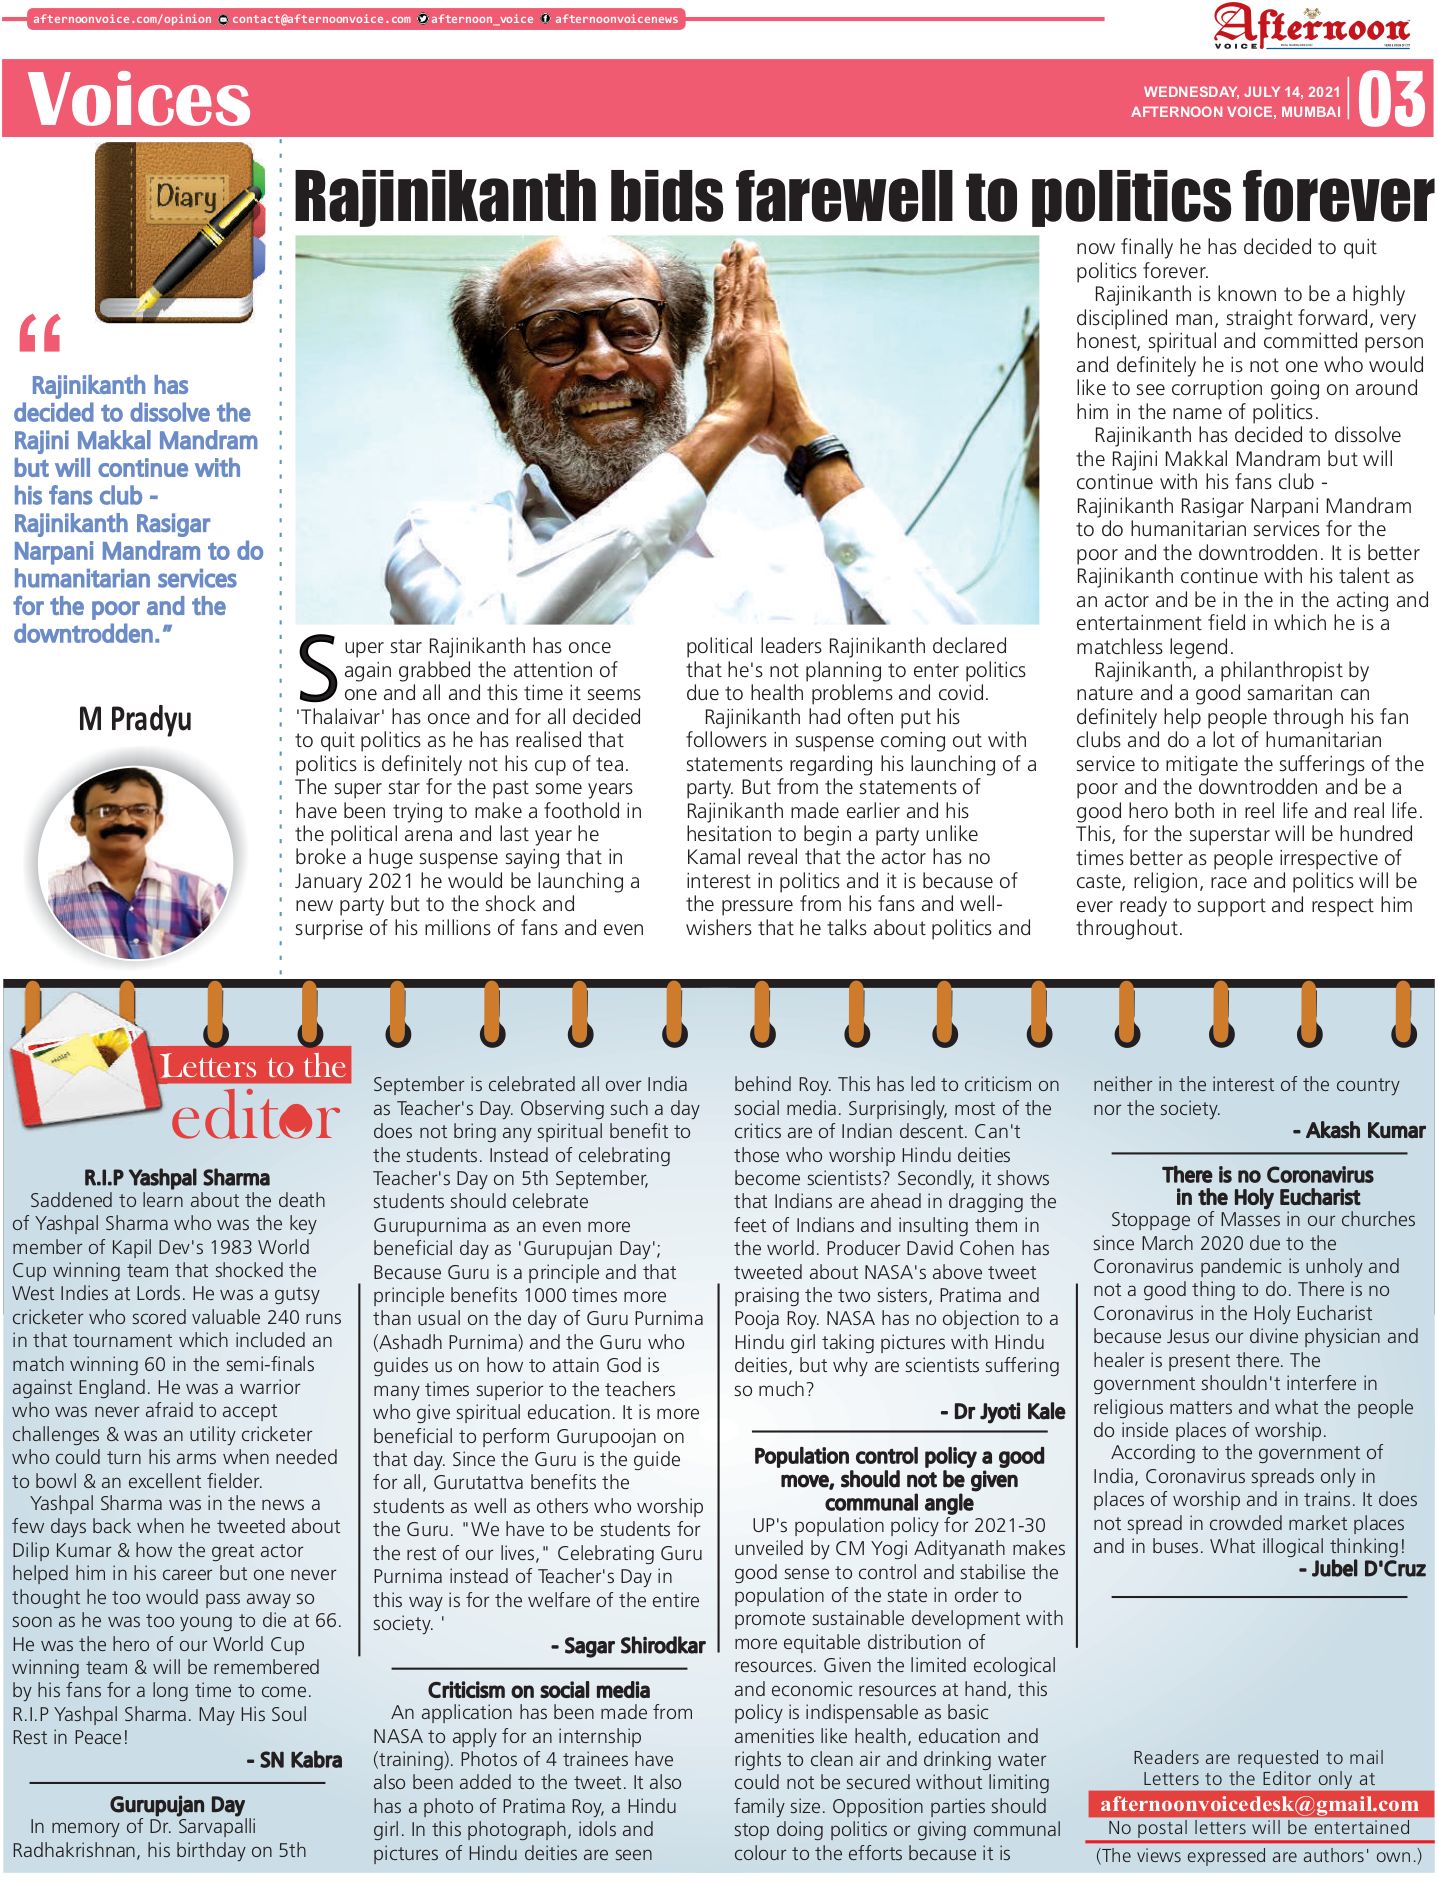 14 July, 2021 - Page 3 - Online English News Paper